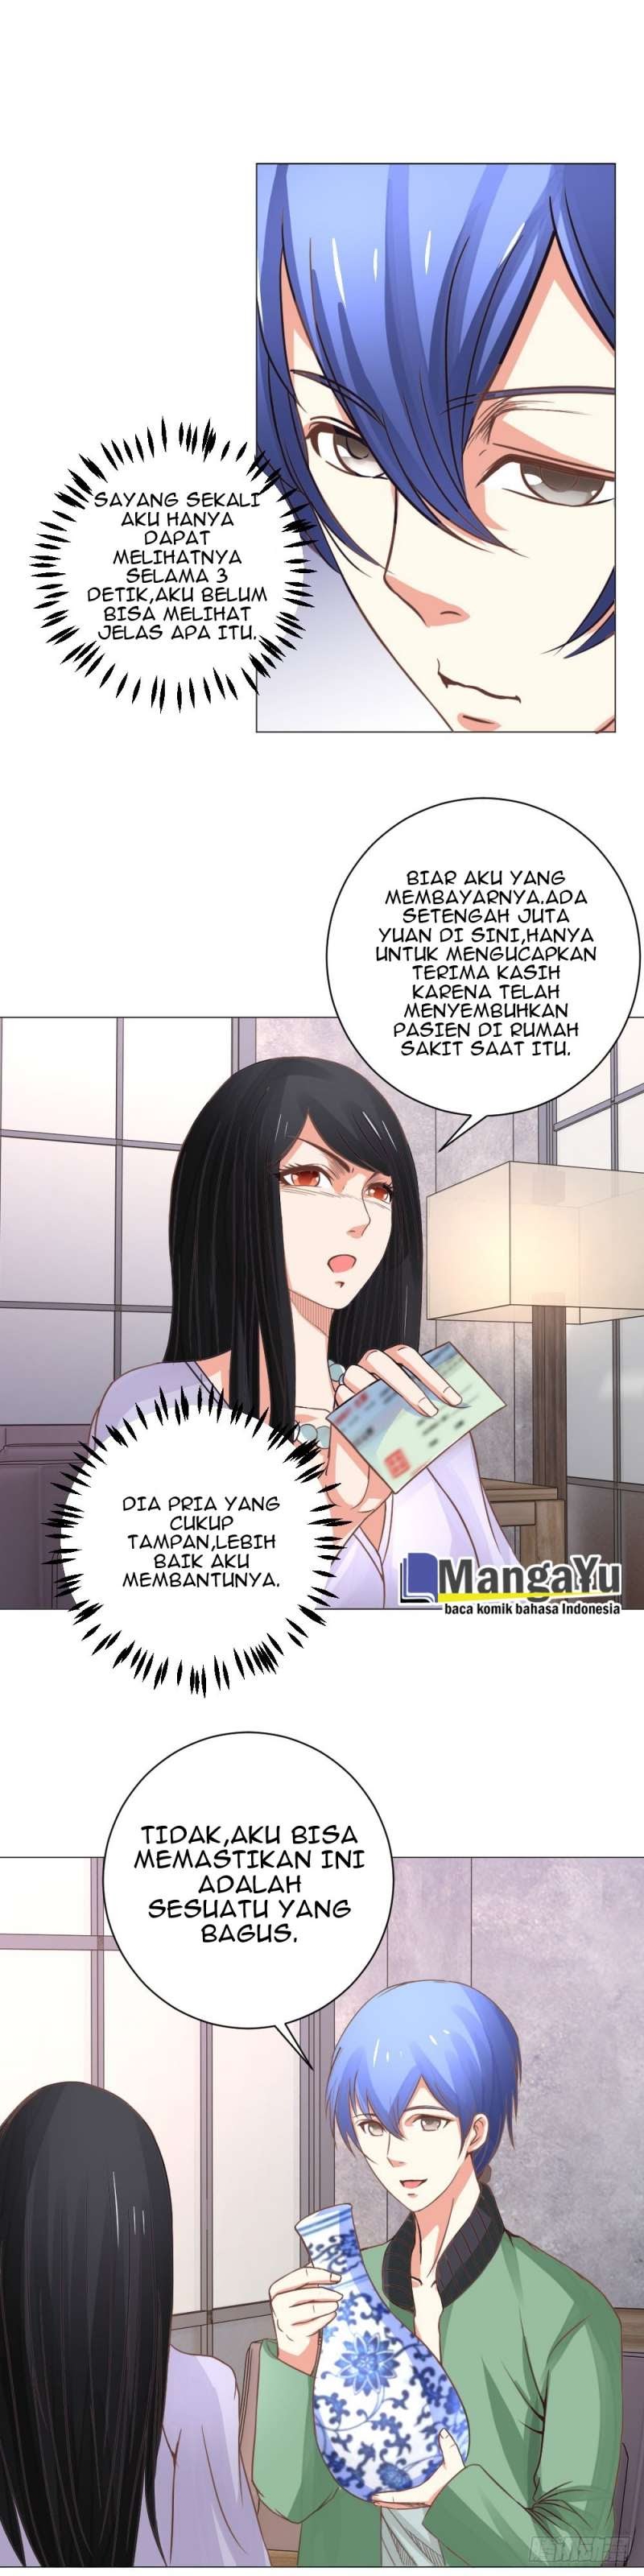 Perspective Medical Saint Chapter 10 2